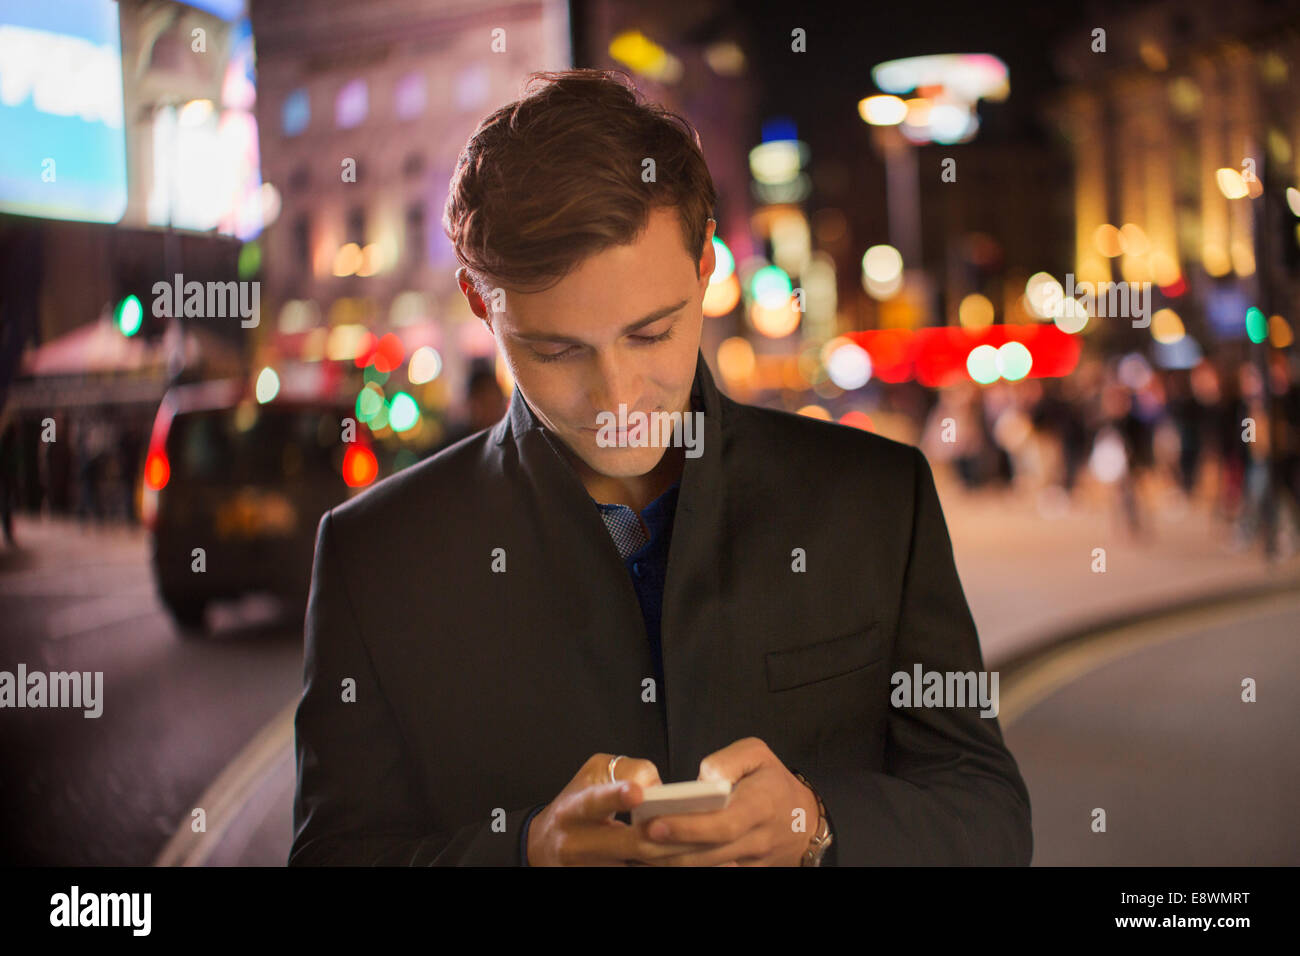 Man using cell phone on city street at night Banque D'Images